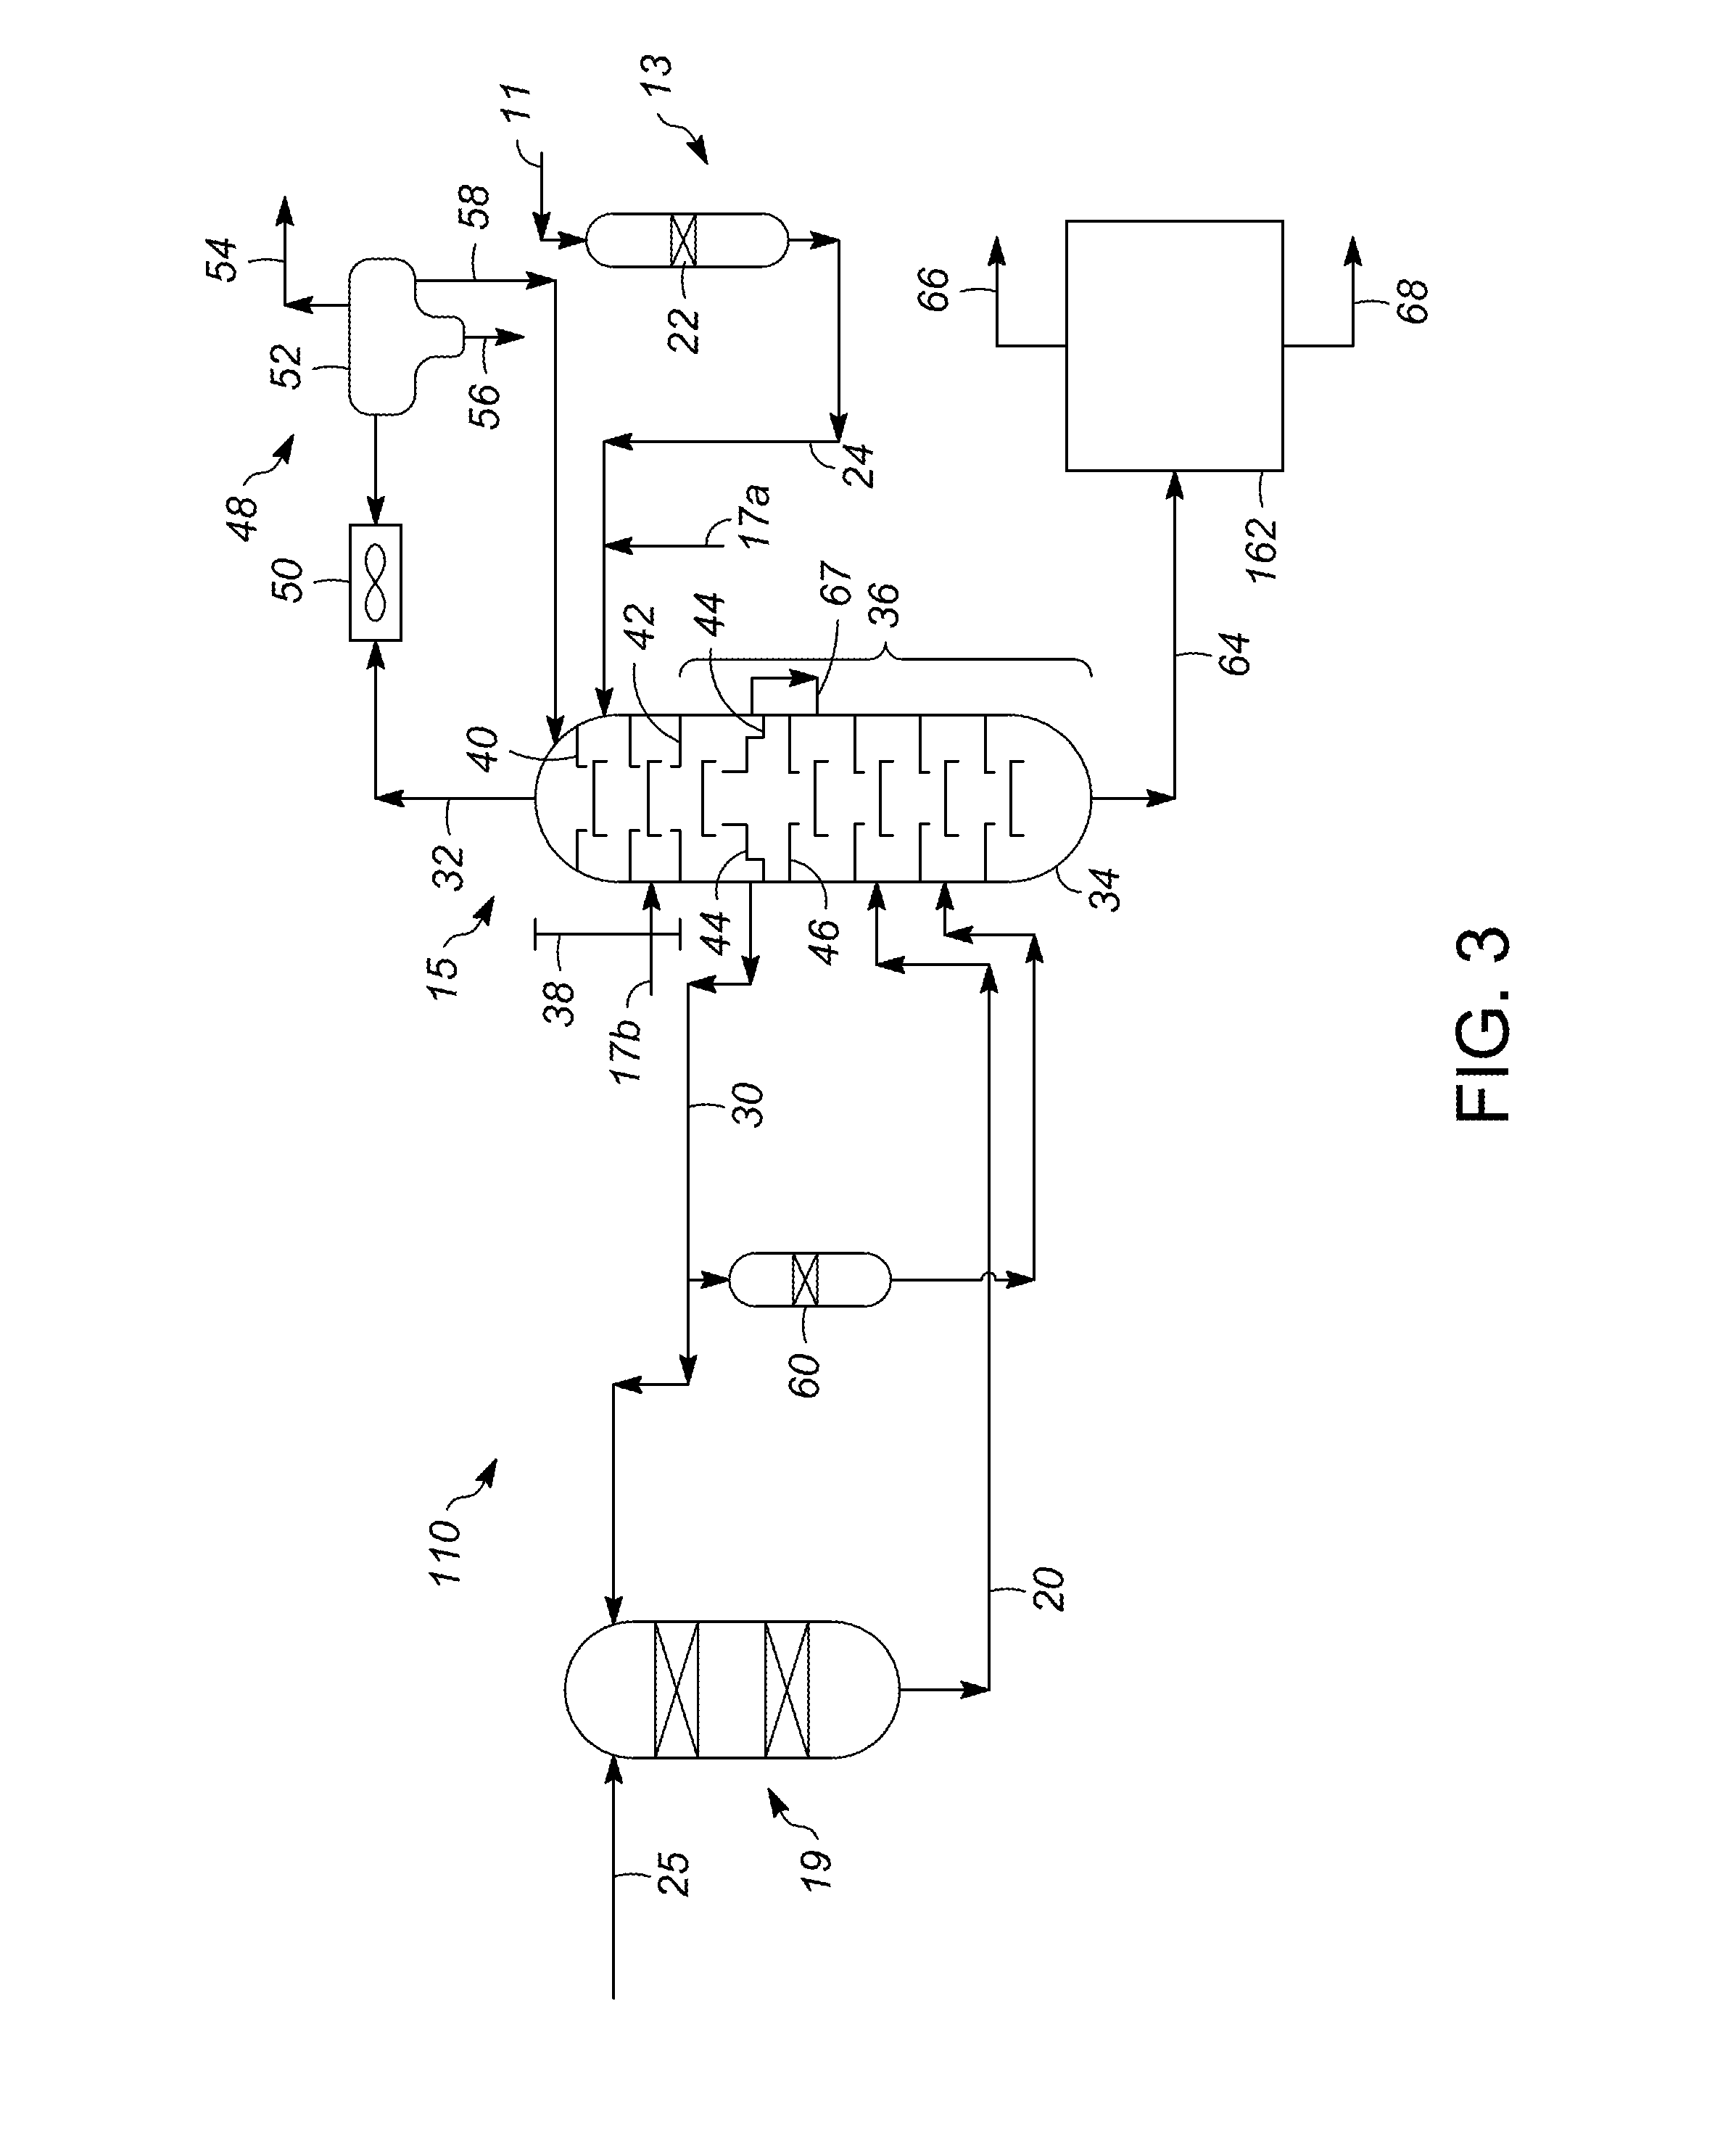 Processes and systems for treating aromatic feed including an aromatic component and nitrogen-containing impurities, and processes and systems for preparing a reaction product of the aromatic component